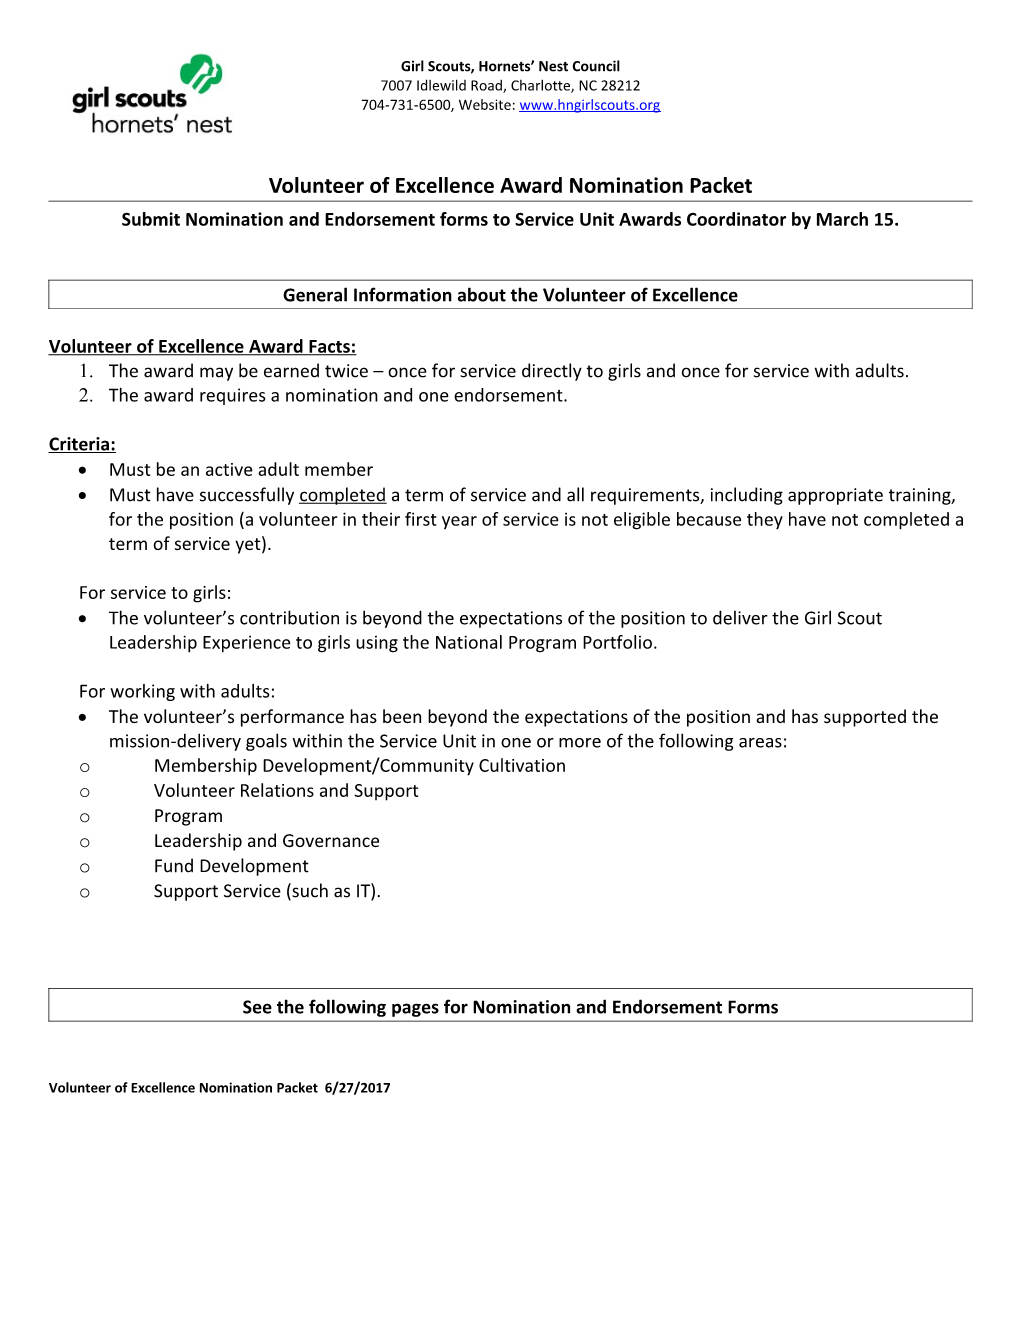 Volunteer of Excellence Award Nomination Packet